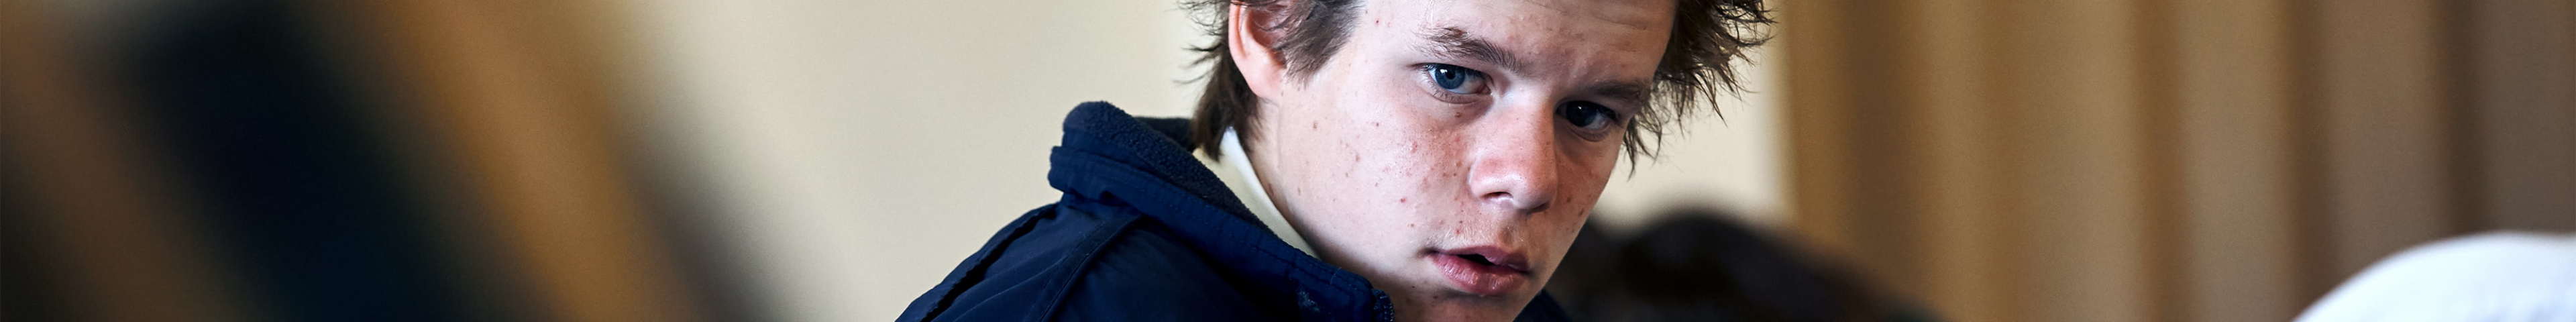 Image of a teen boy looking into the camera.